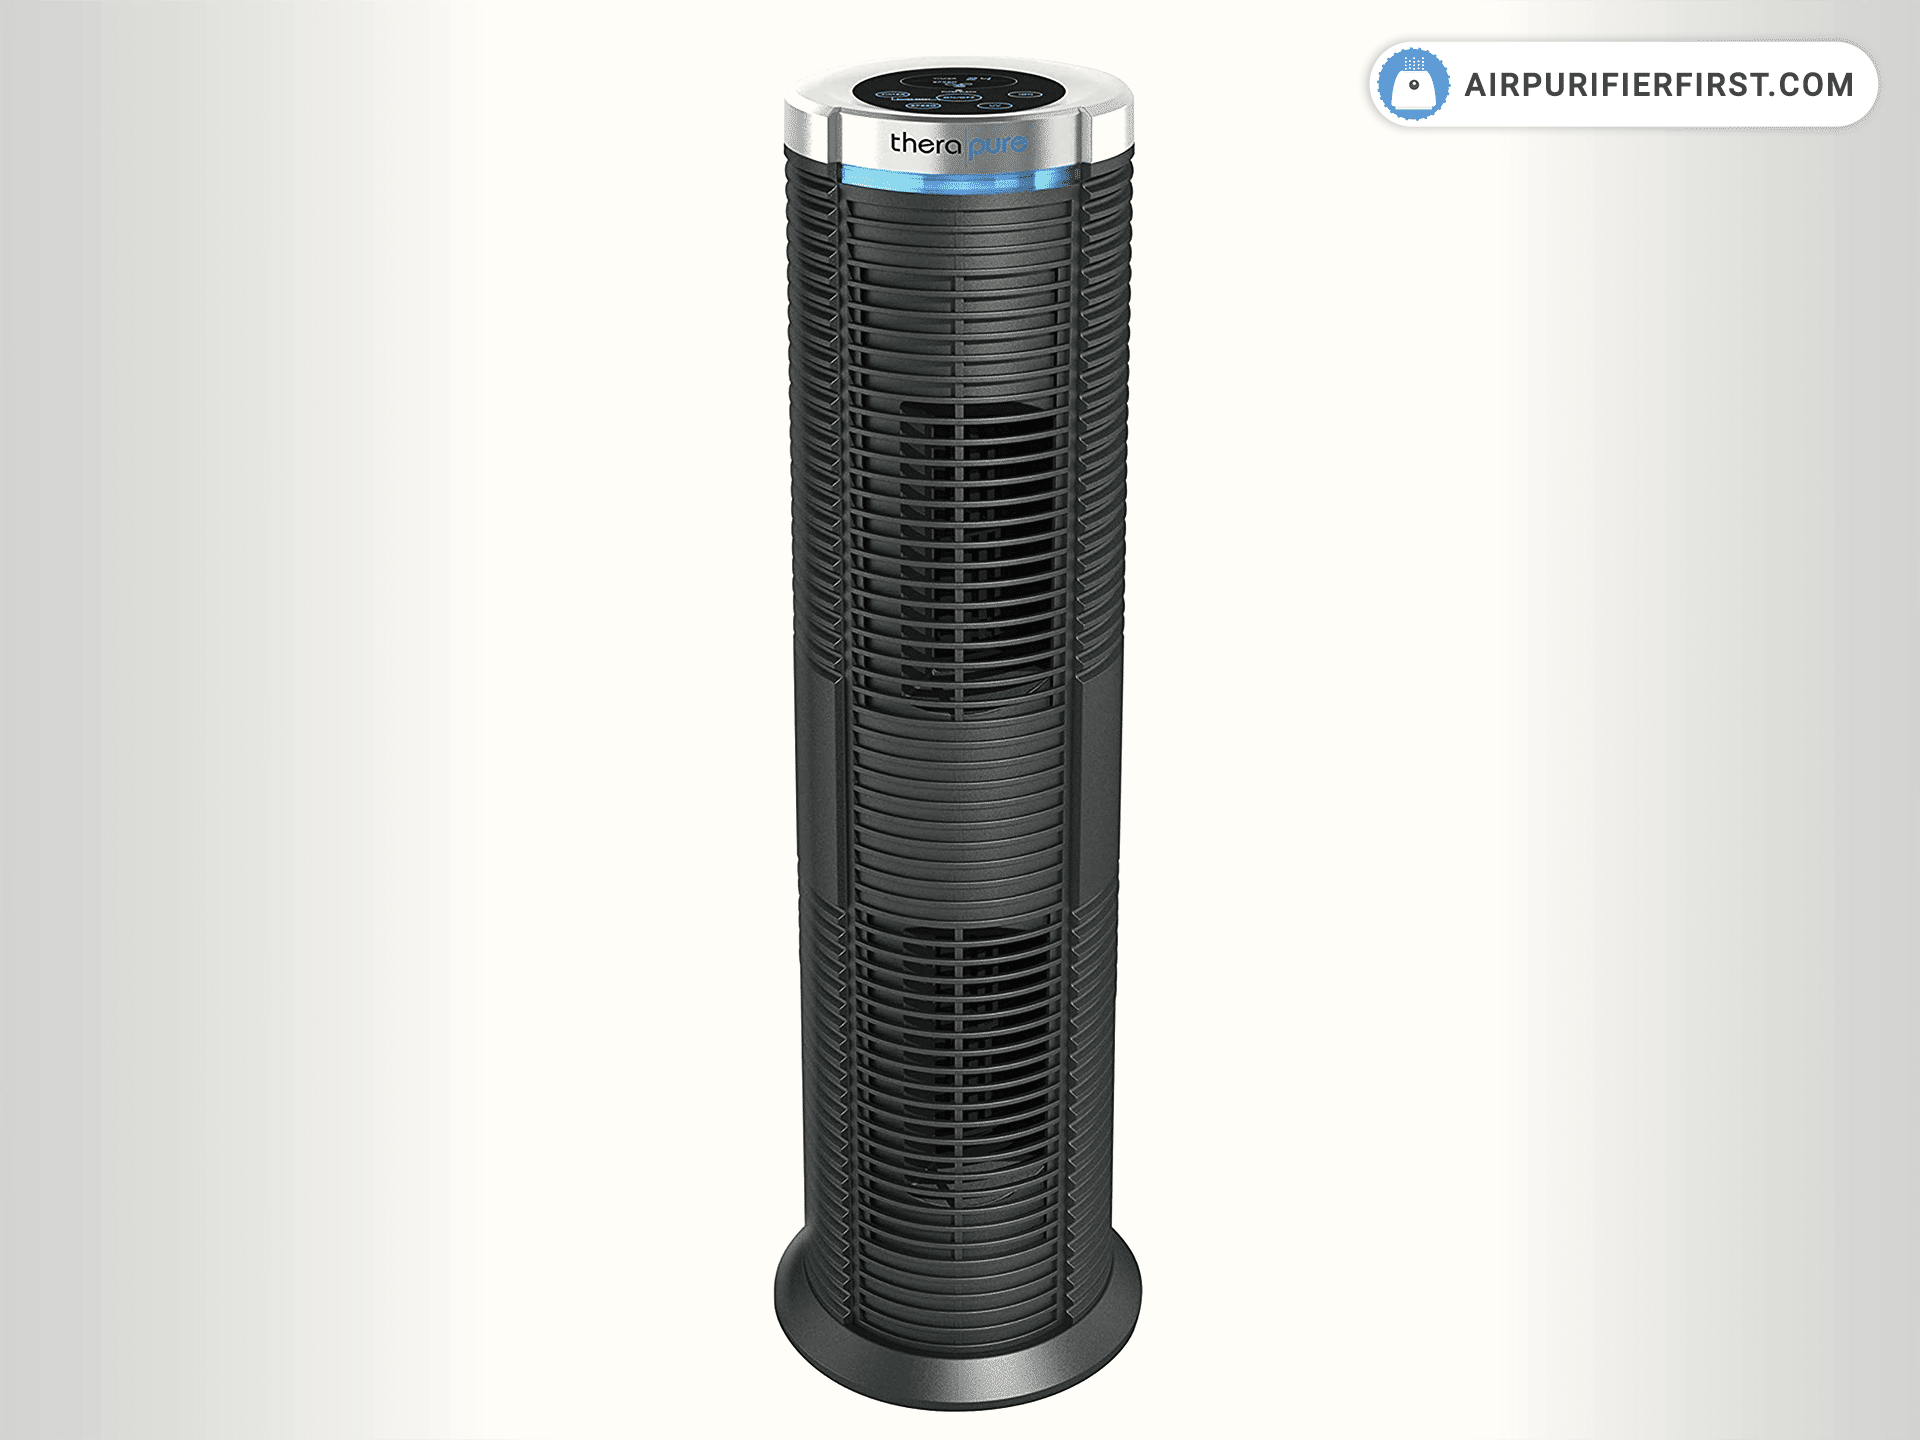 ENVION Therapure TPP240 - Best Air Purifier With Washable Filters